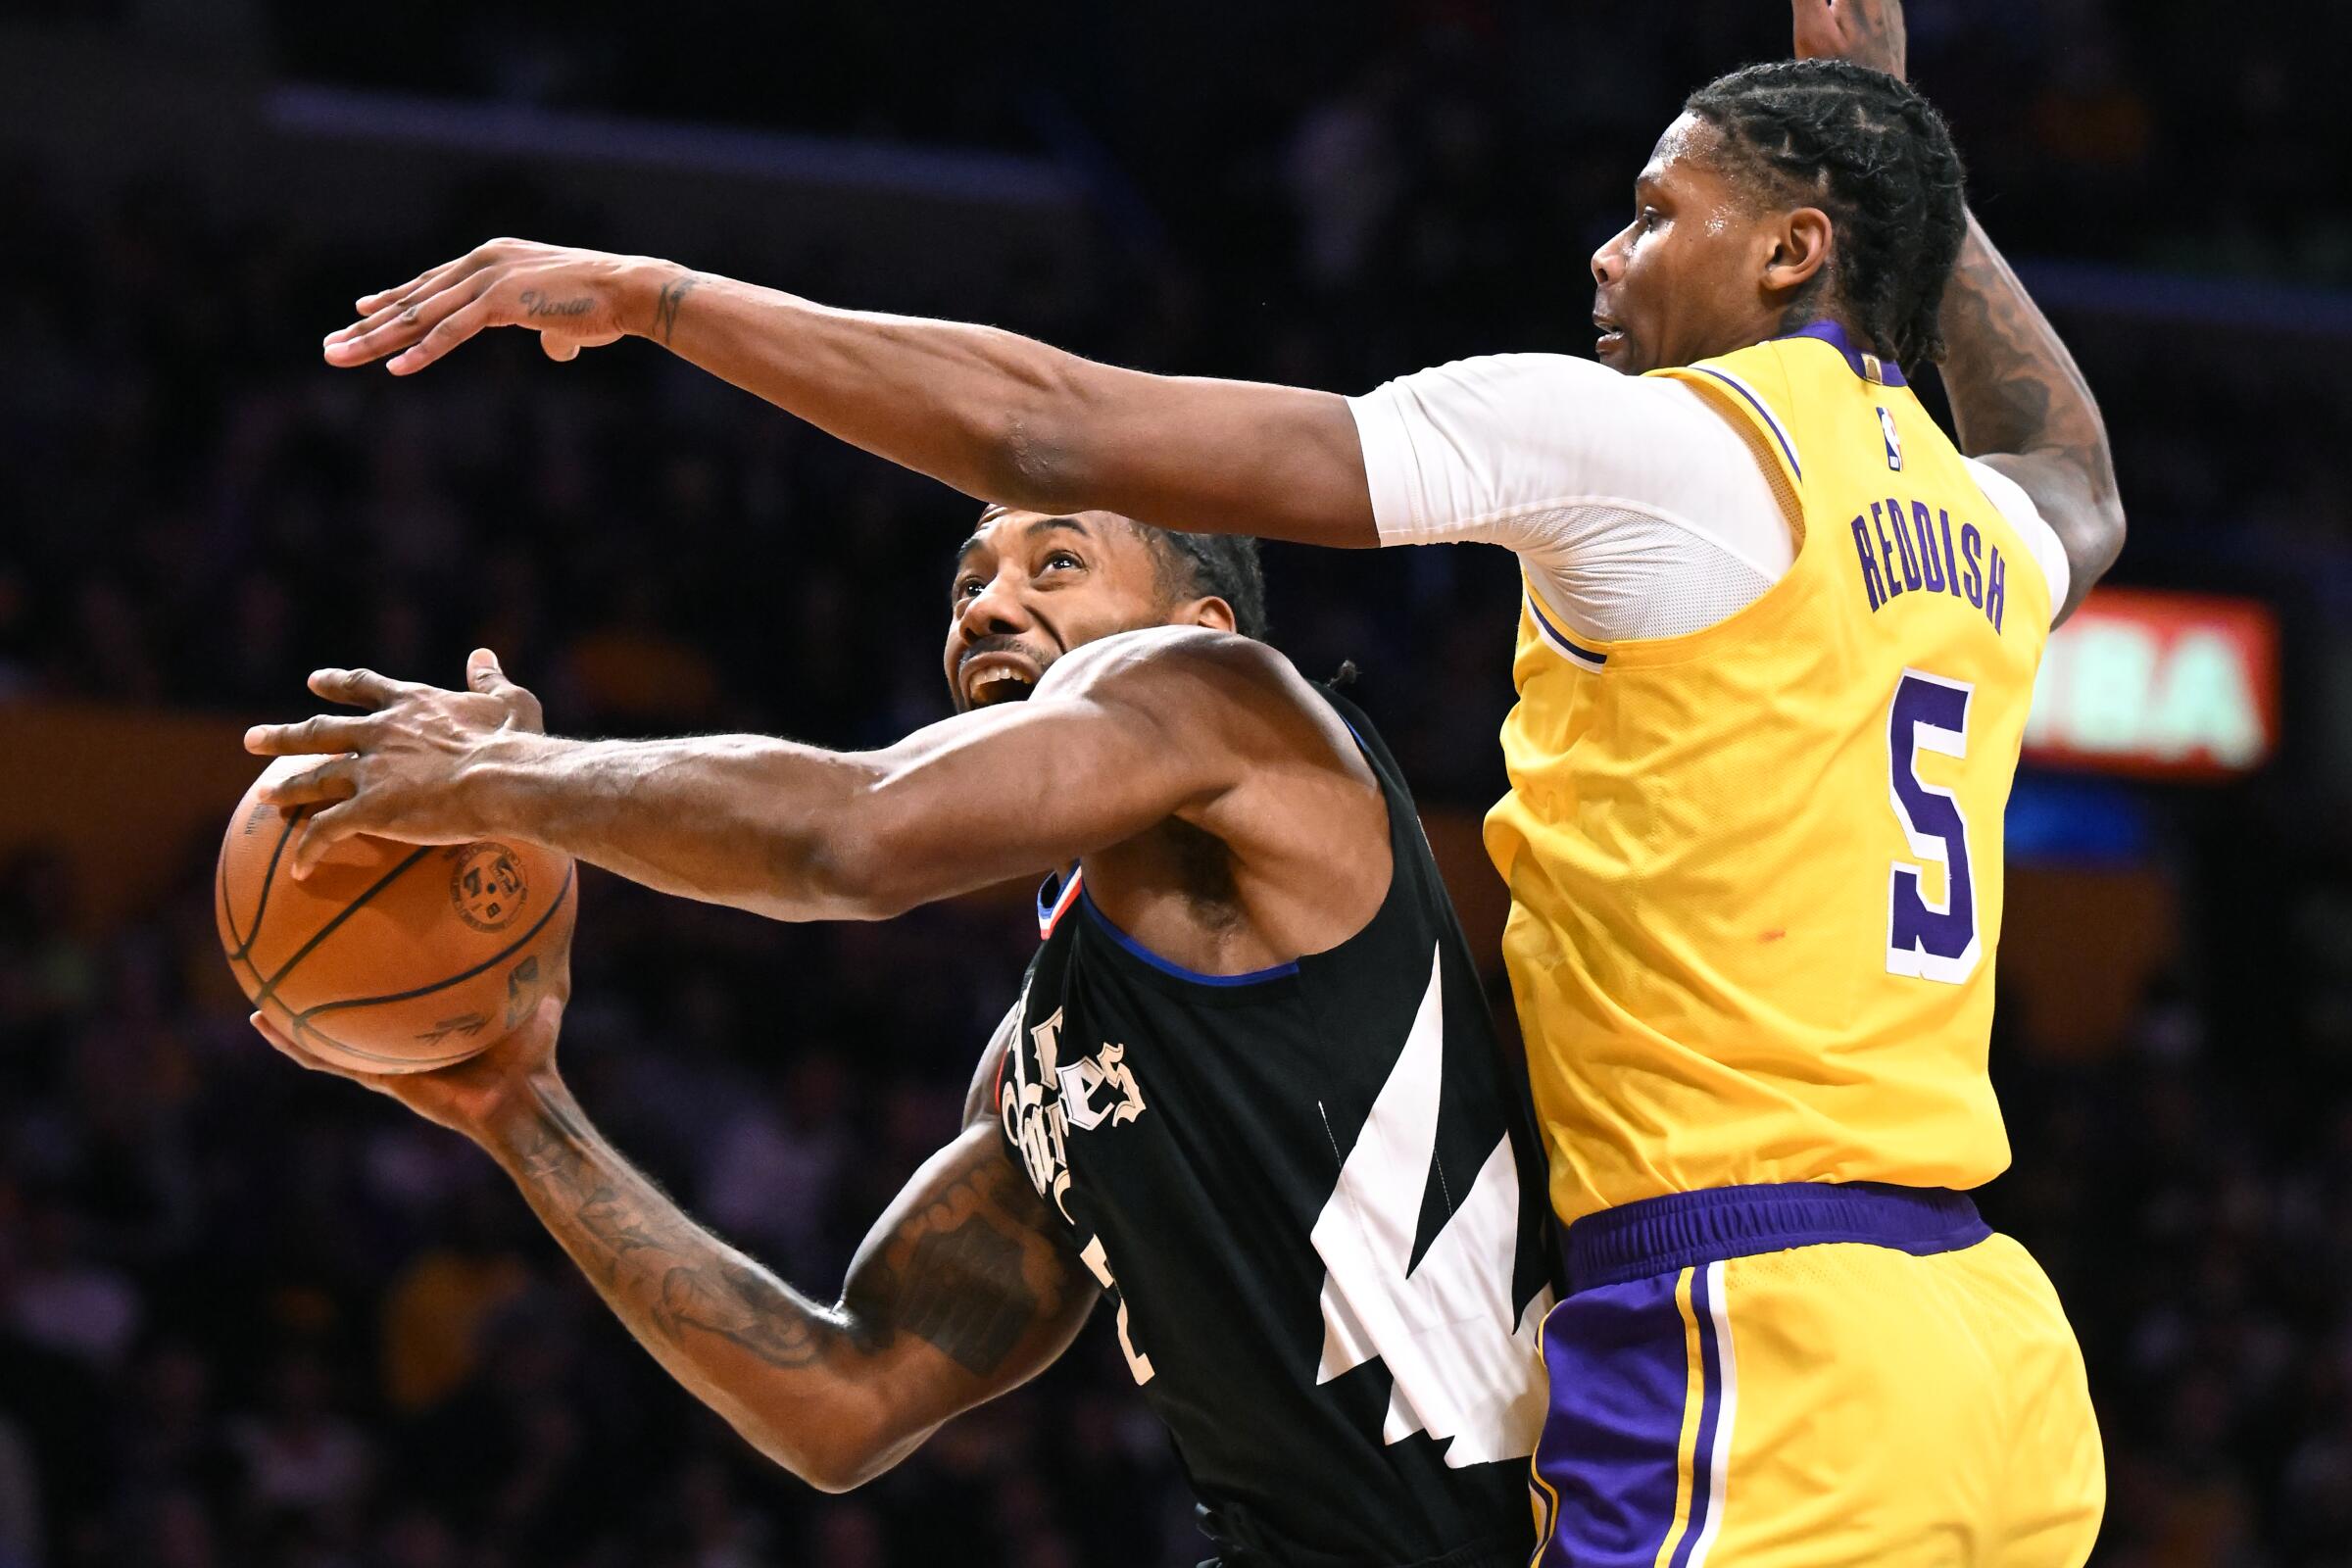 The Clippers' Kawhi Leonard is fouled by the Lakers' Cam Reddish.